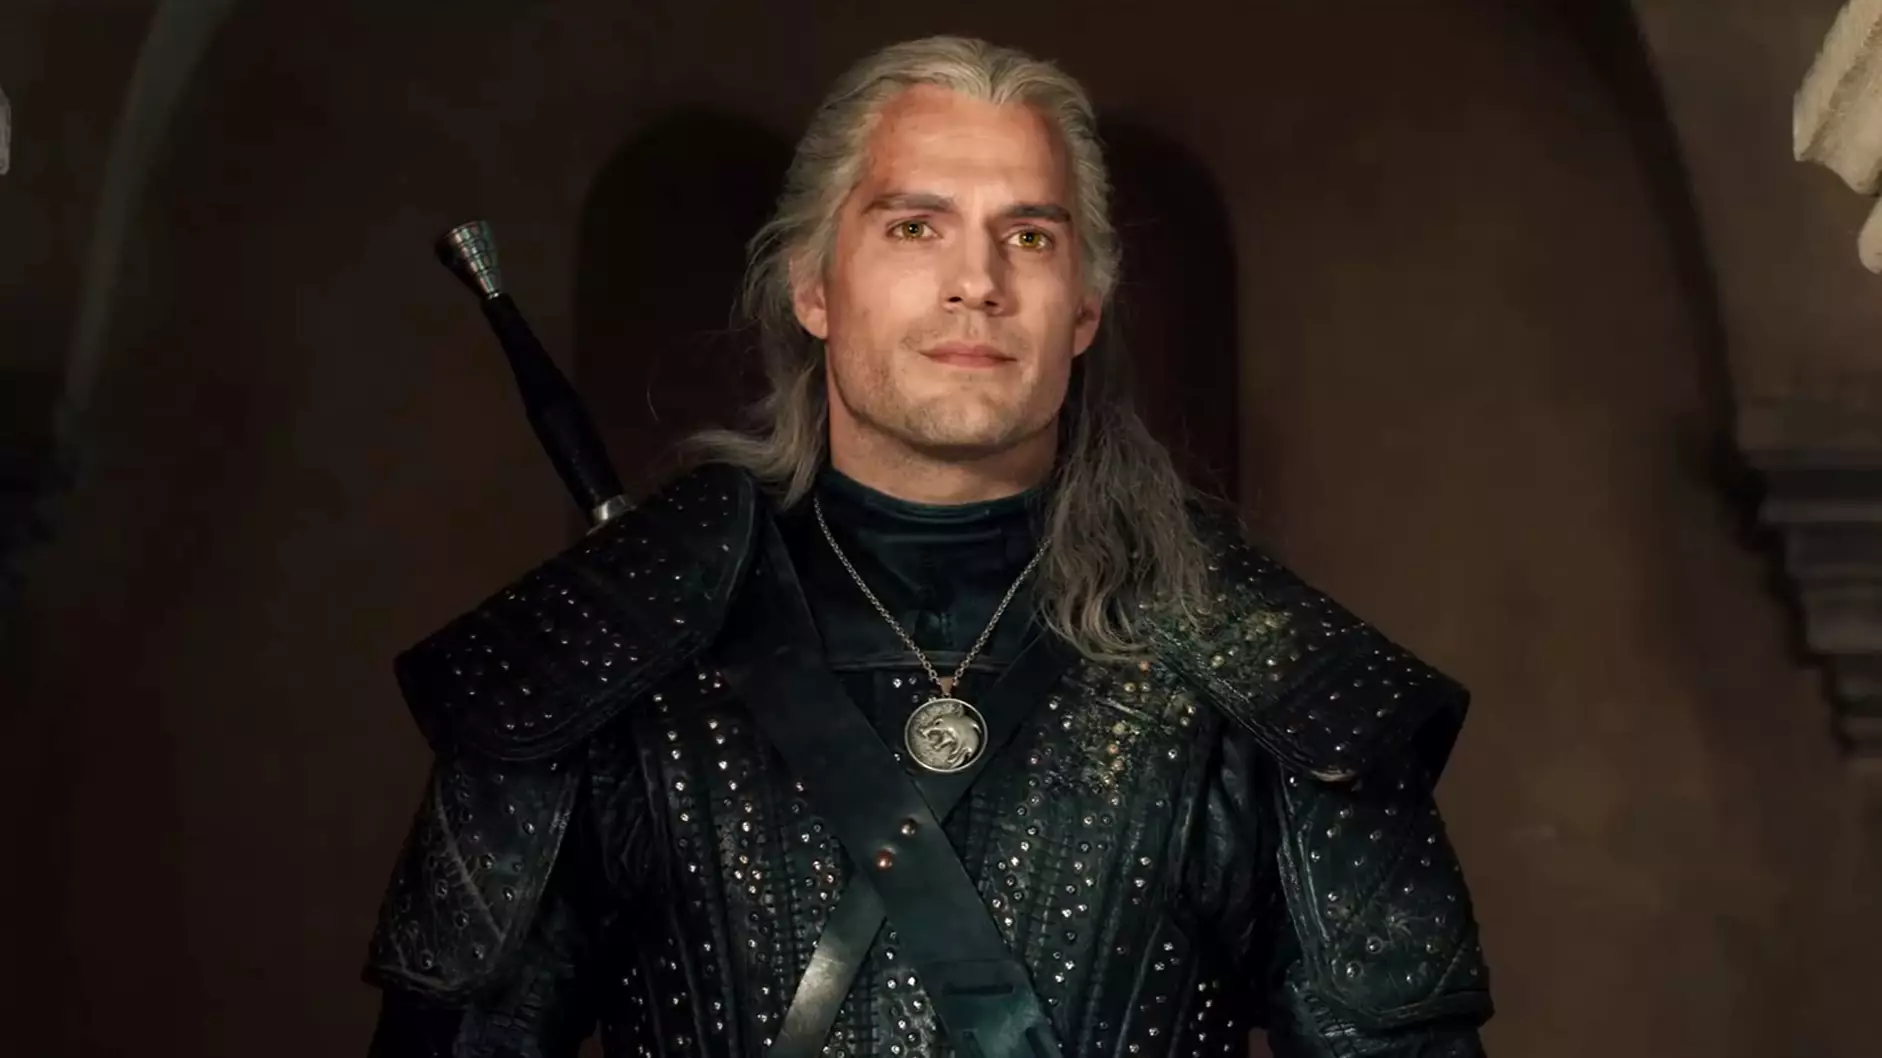 The Witcher Season Two Will Restart Filming On 17 August